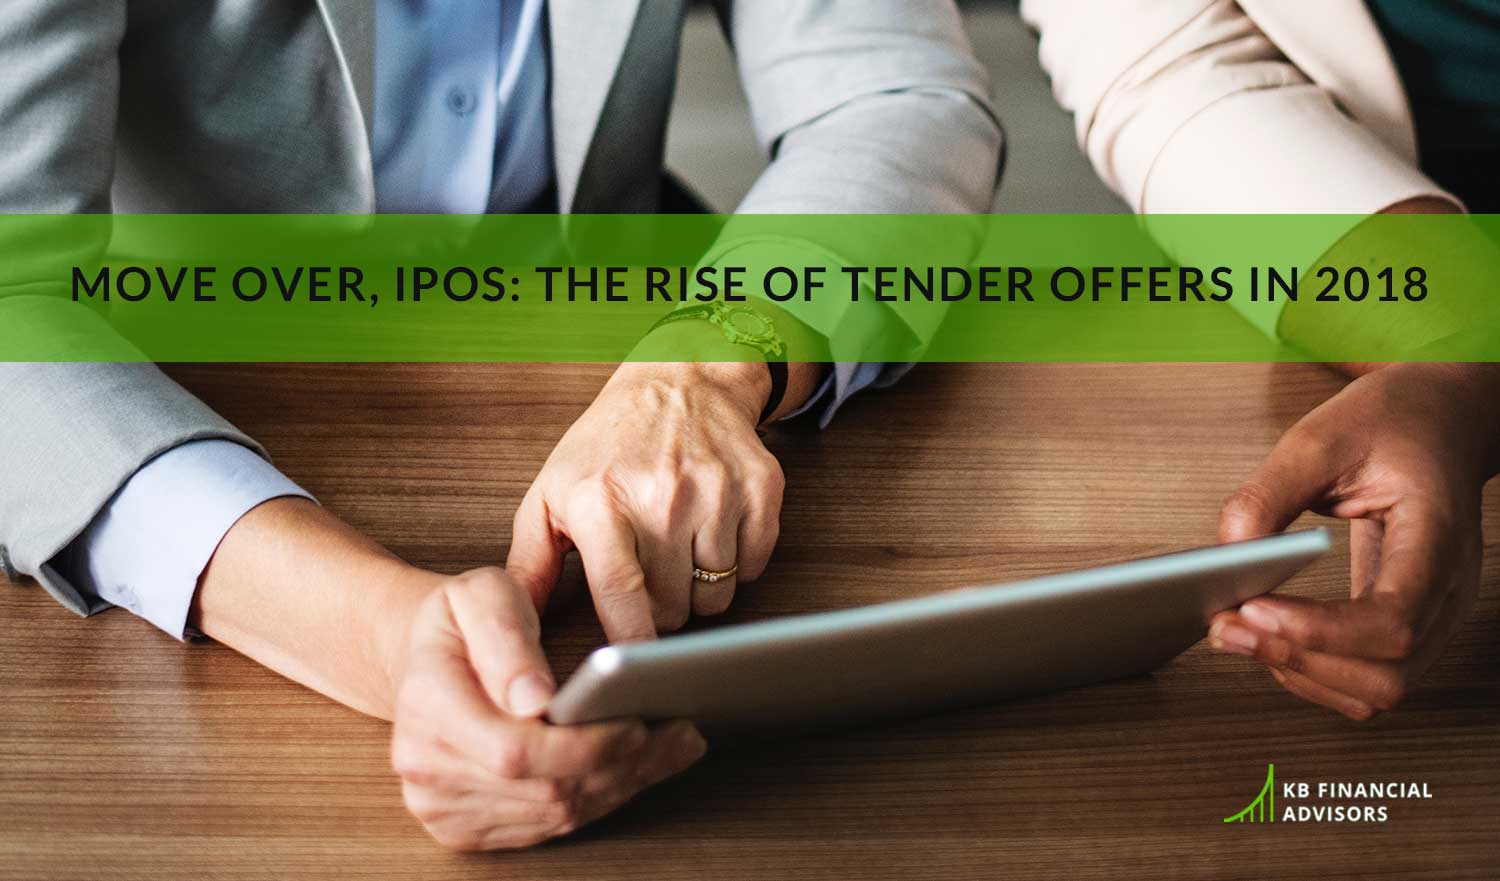 Move Over, IPOS: The Rise of Tender Offers in 2018